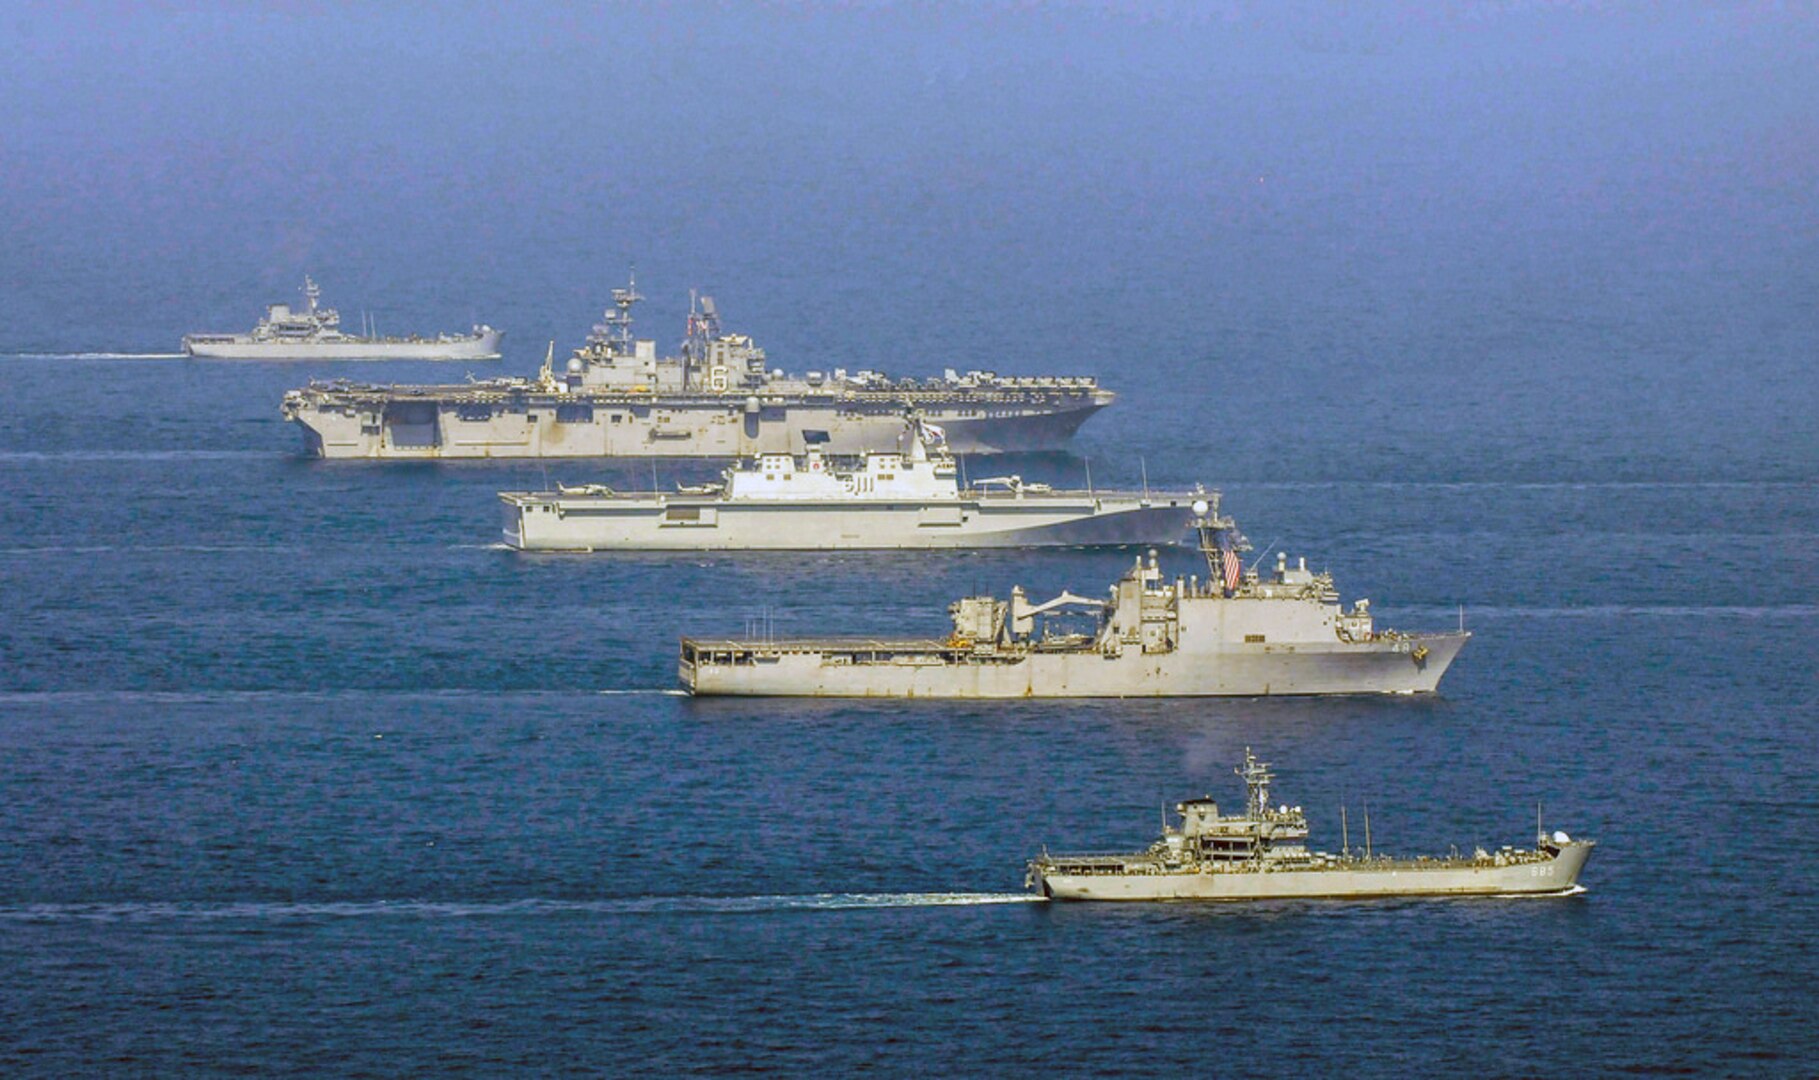 WATERS TO THE EAST OF THE KOREAN PENINSULA (Mar. 27, 2015) - The forward-deployed amphibious assault ship USS Bonhomme Richard (LHD 6) and forward-deployed dock landing ship USS Ashland (LSD 48) operate with Republic of Korea (ROK) Navy amphibious assault ship ROKS Dokdo (LPH 6111), ROKS Hyang Ro Bong (LST 683) and ROKS Sung In Bong (LST 685). U.S Sailors and Marines from the Bonhomme Richard Amphibious Ready Group (ARG), which also includes the the forward-deployed amphibious transport dock ship USS Green Bay (LPD 20), along with the 31st Marine Expeditionary Unit (MEU) are participating in the Korean Marine Exchange Program (KMEP) in the ROK with the ROK Marine Corps and Navy. 